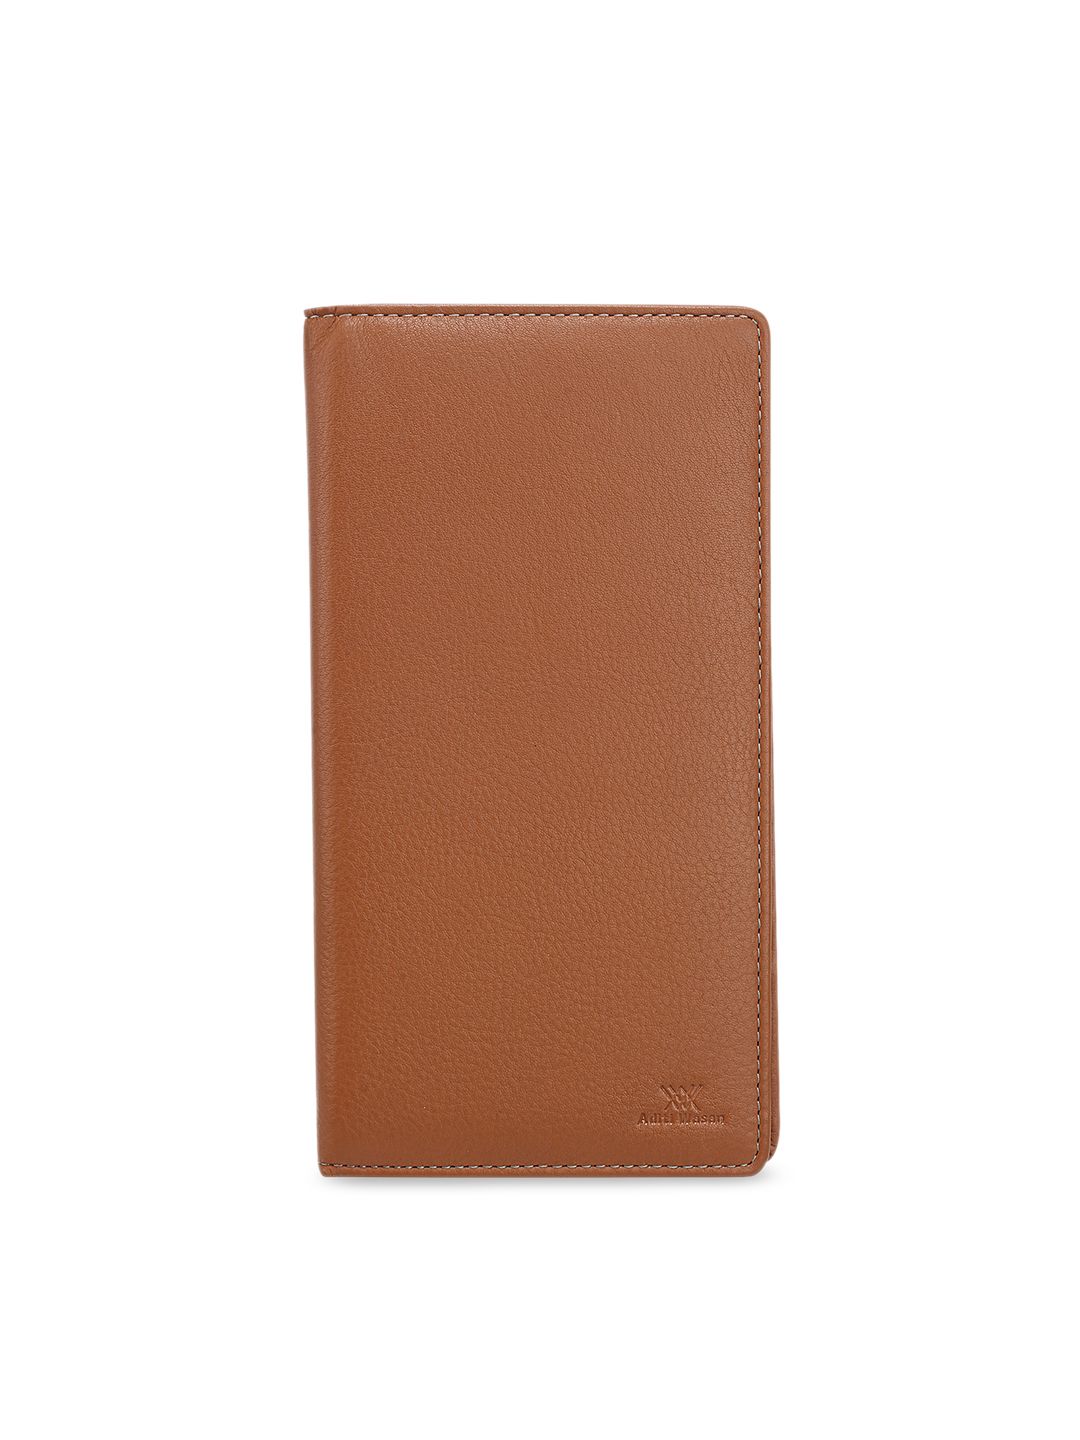 Aditi Wasan Unisex Brown Leather Solid Passport Holder Price in India